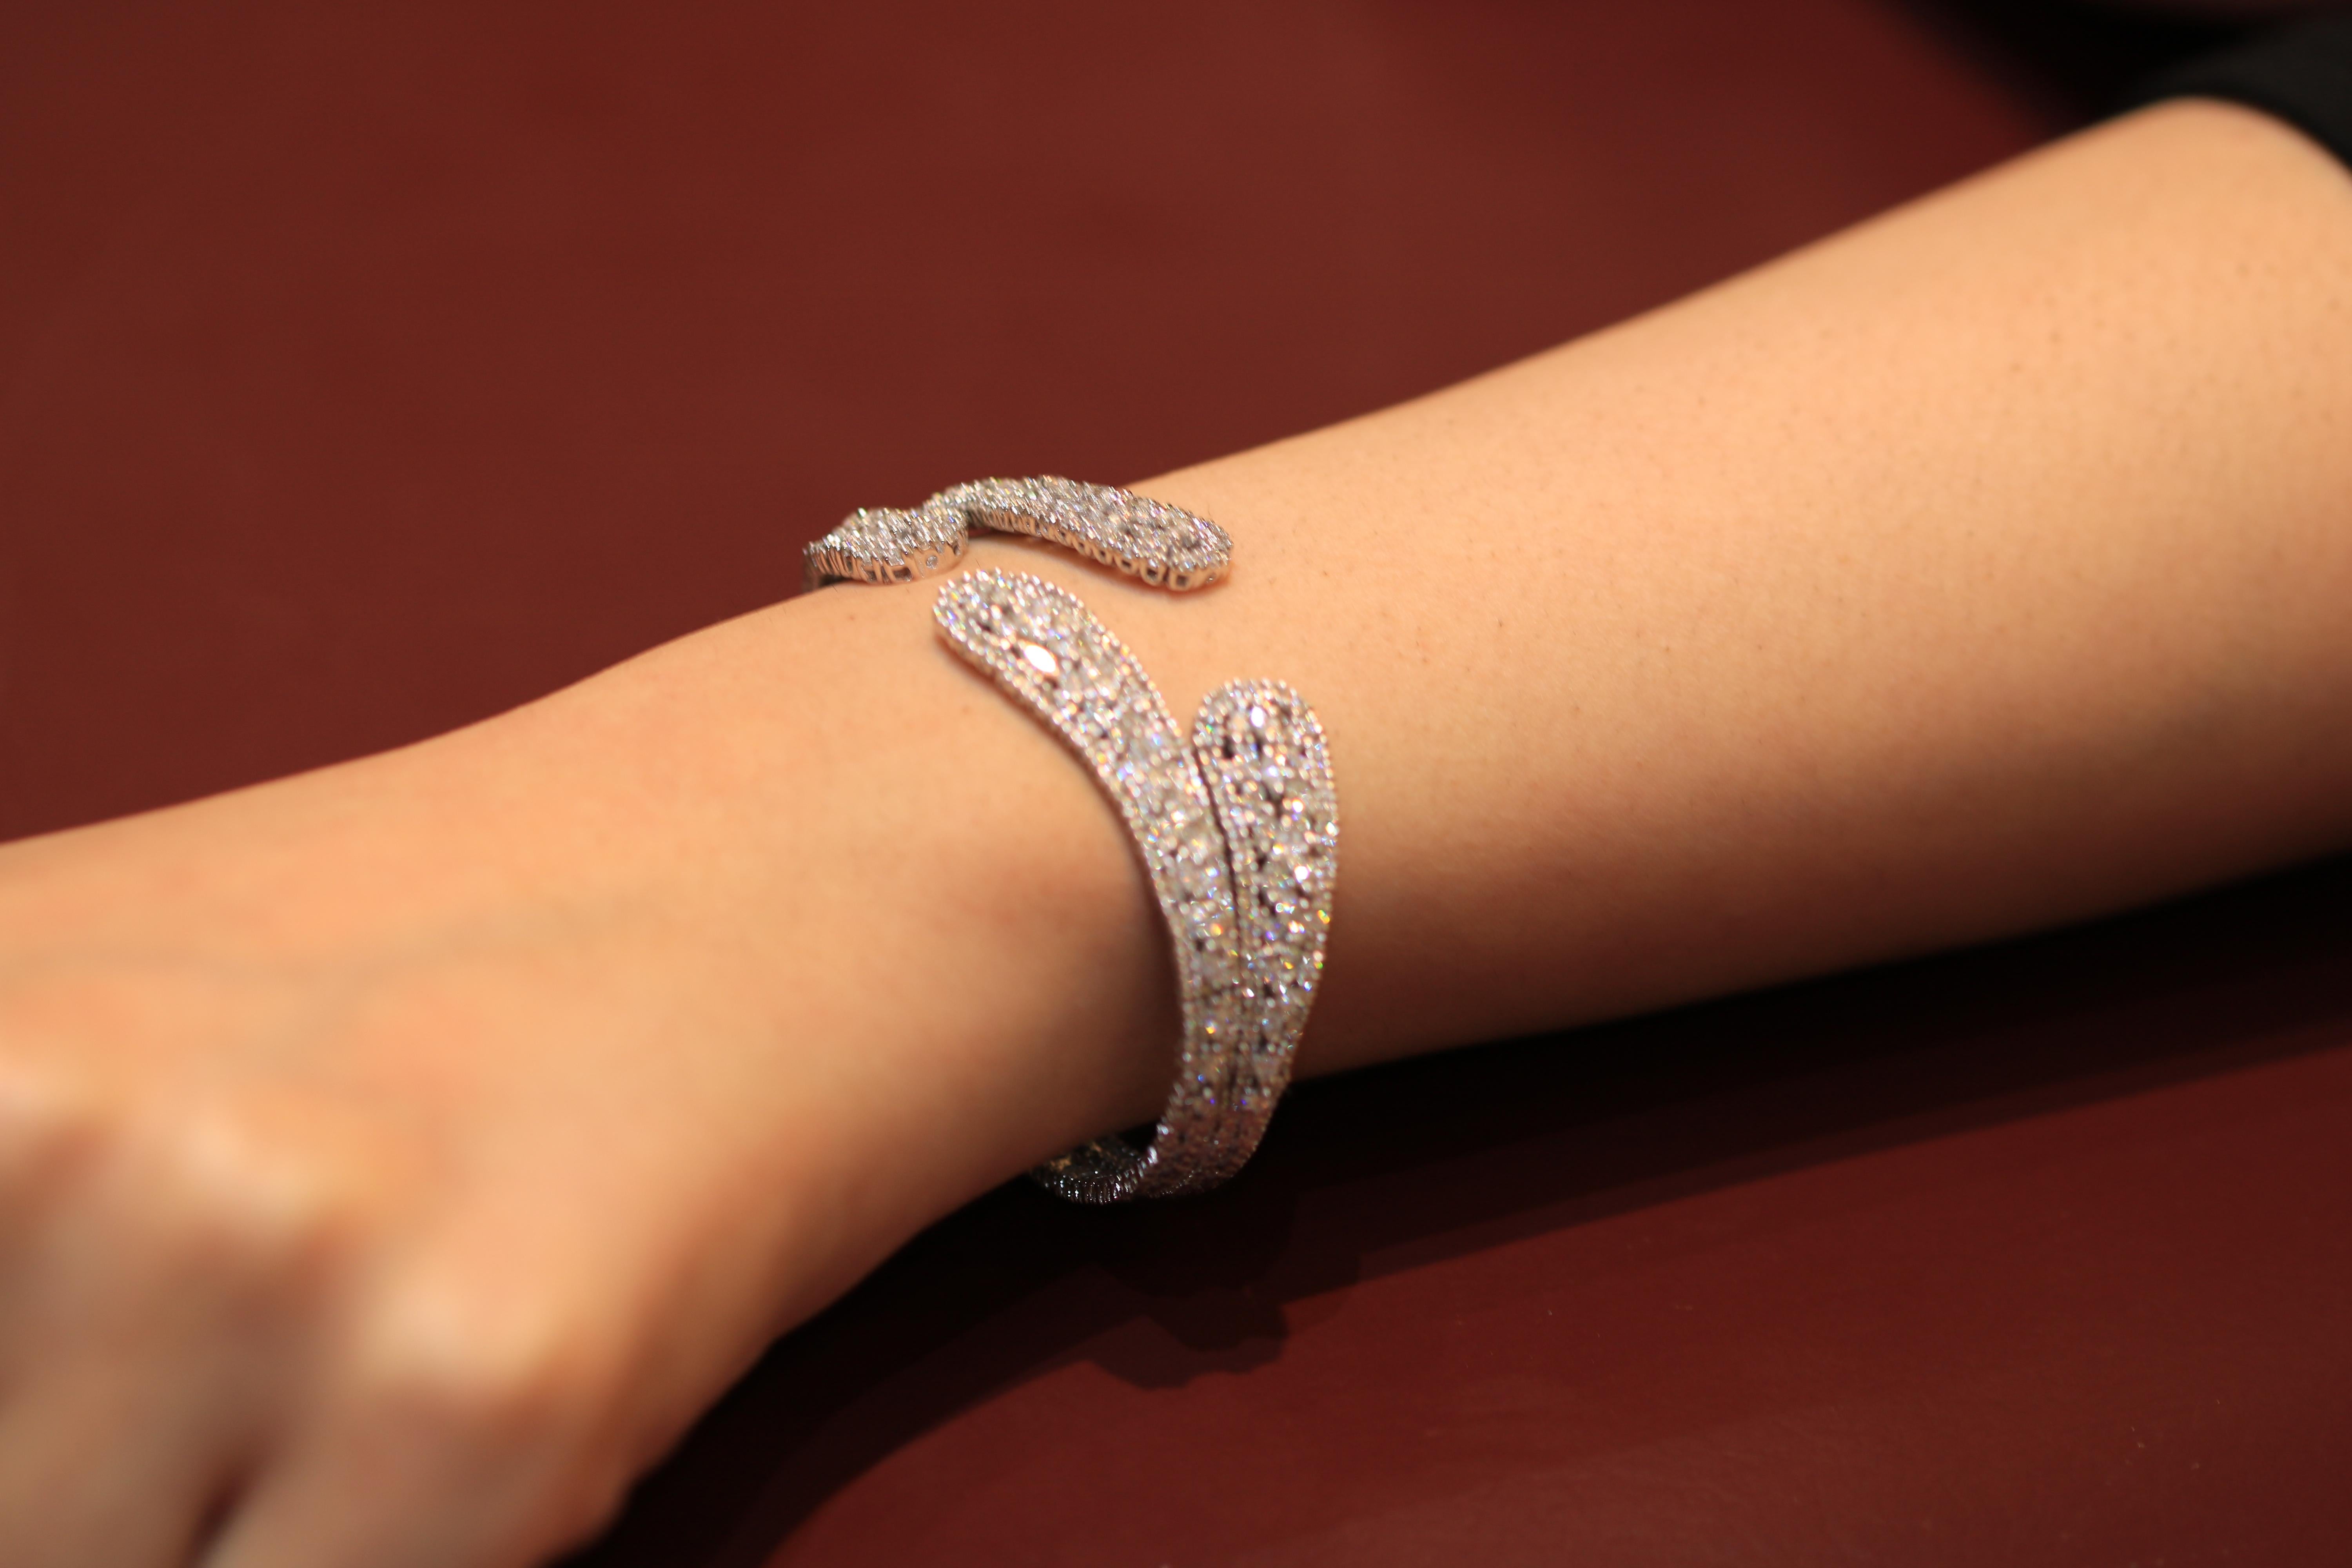 Simple and classic bracelet by Amwaj jewelry, fully covered with Marquise and round shape diamonds that give a delicate touch for a glamorous and feminine look of the lady who will choose this eternal piece of art. Classic and contemporary at the